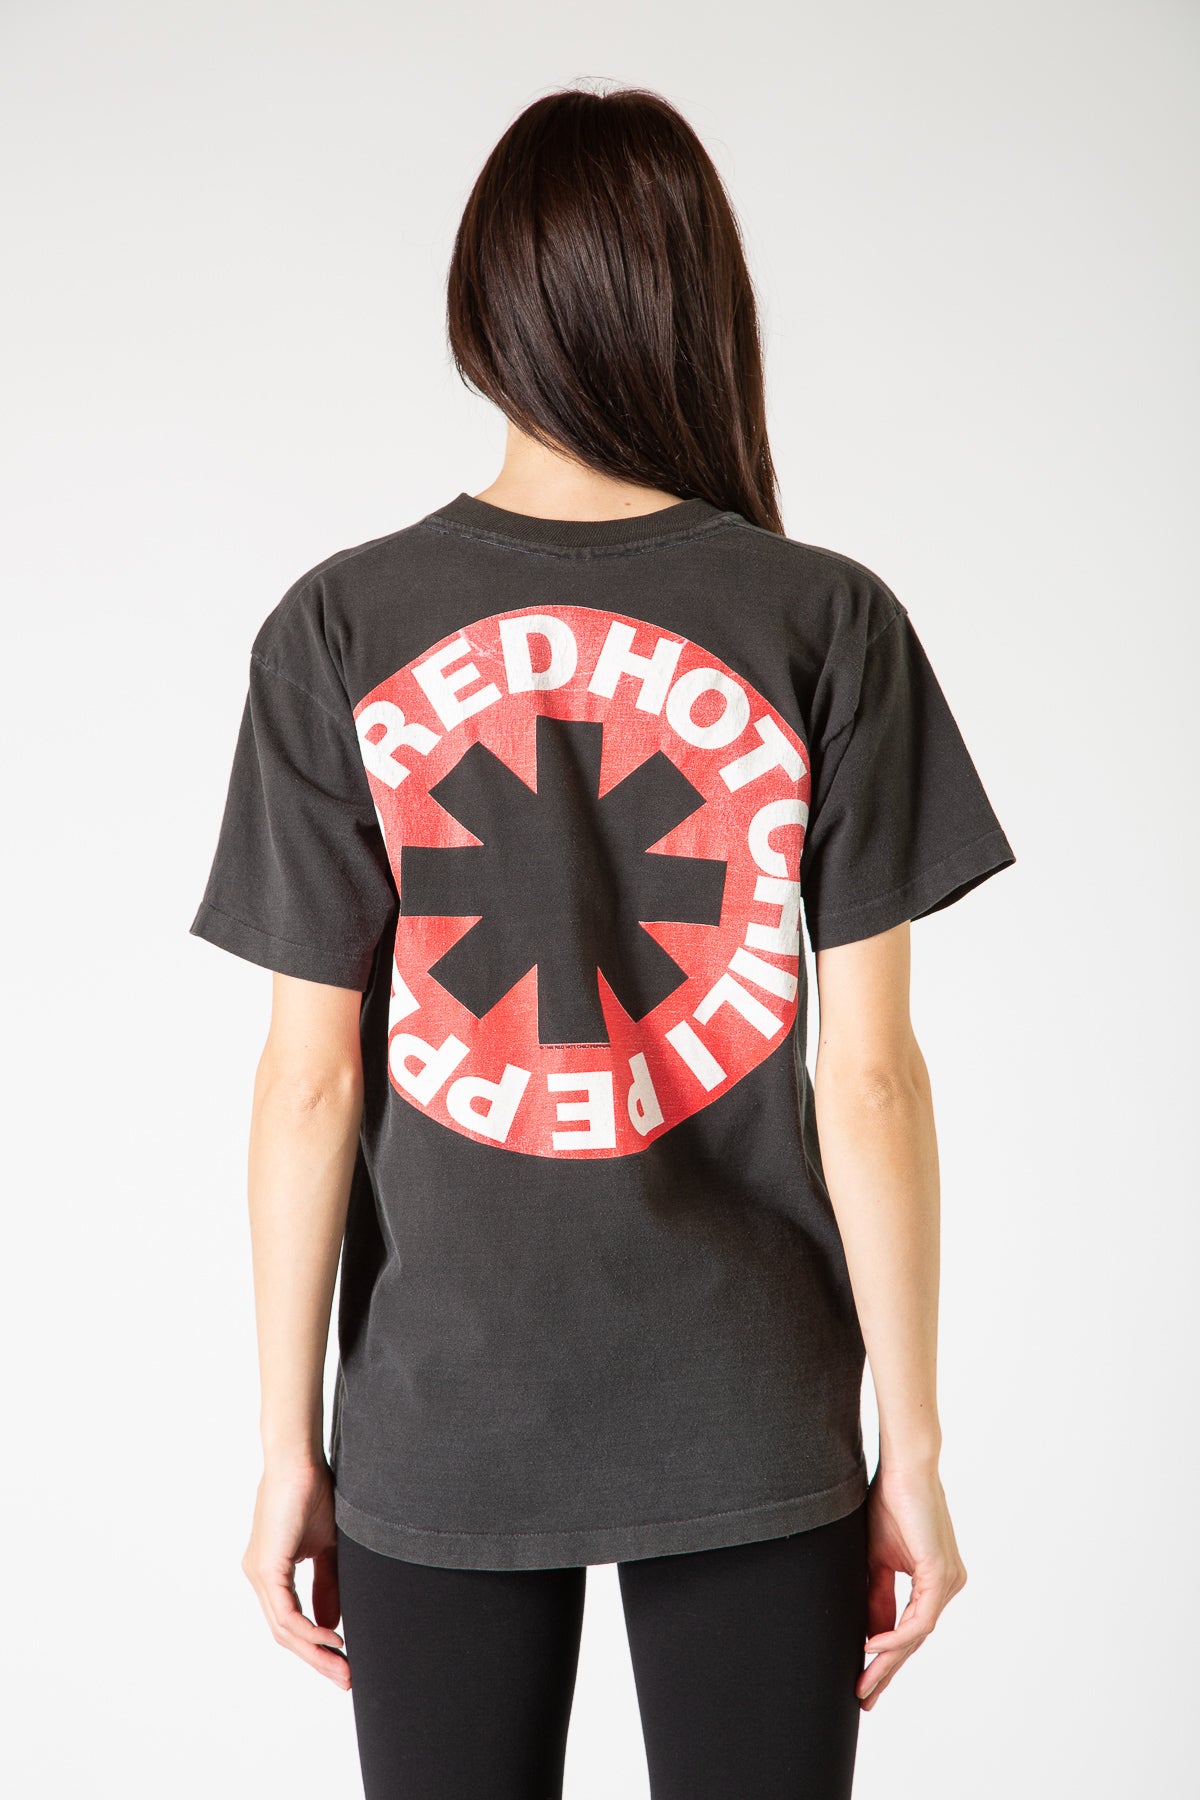 MAXFIELD VINTAGE | 1991 RED HOT CHILI PEPPERS TOUR TEE